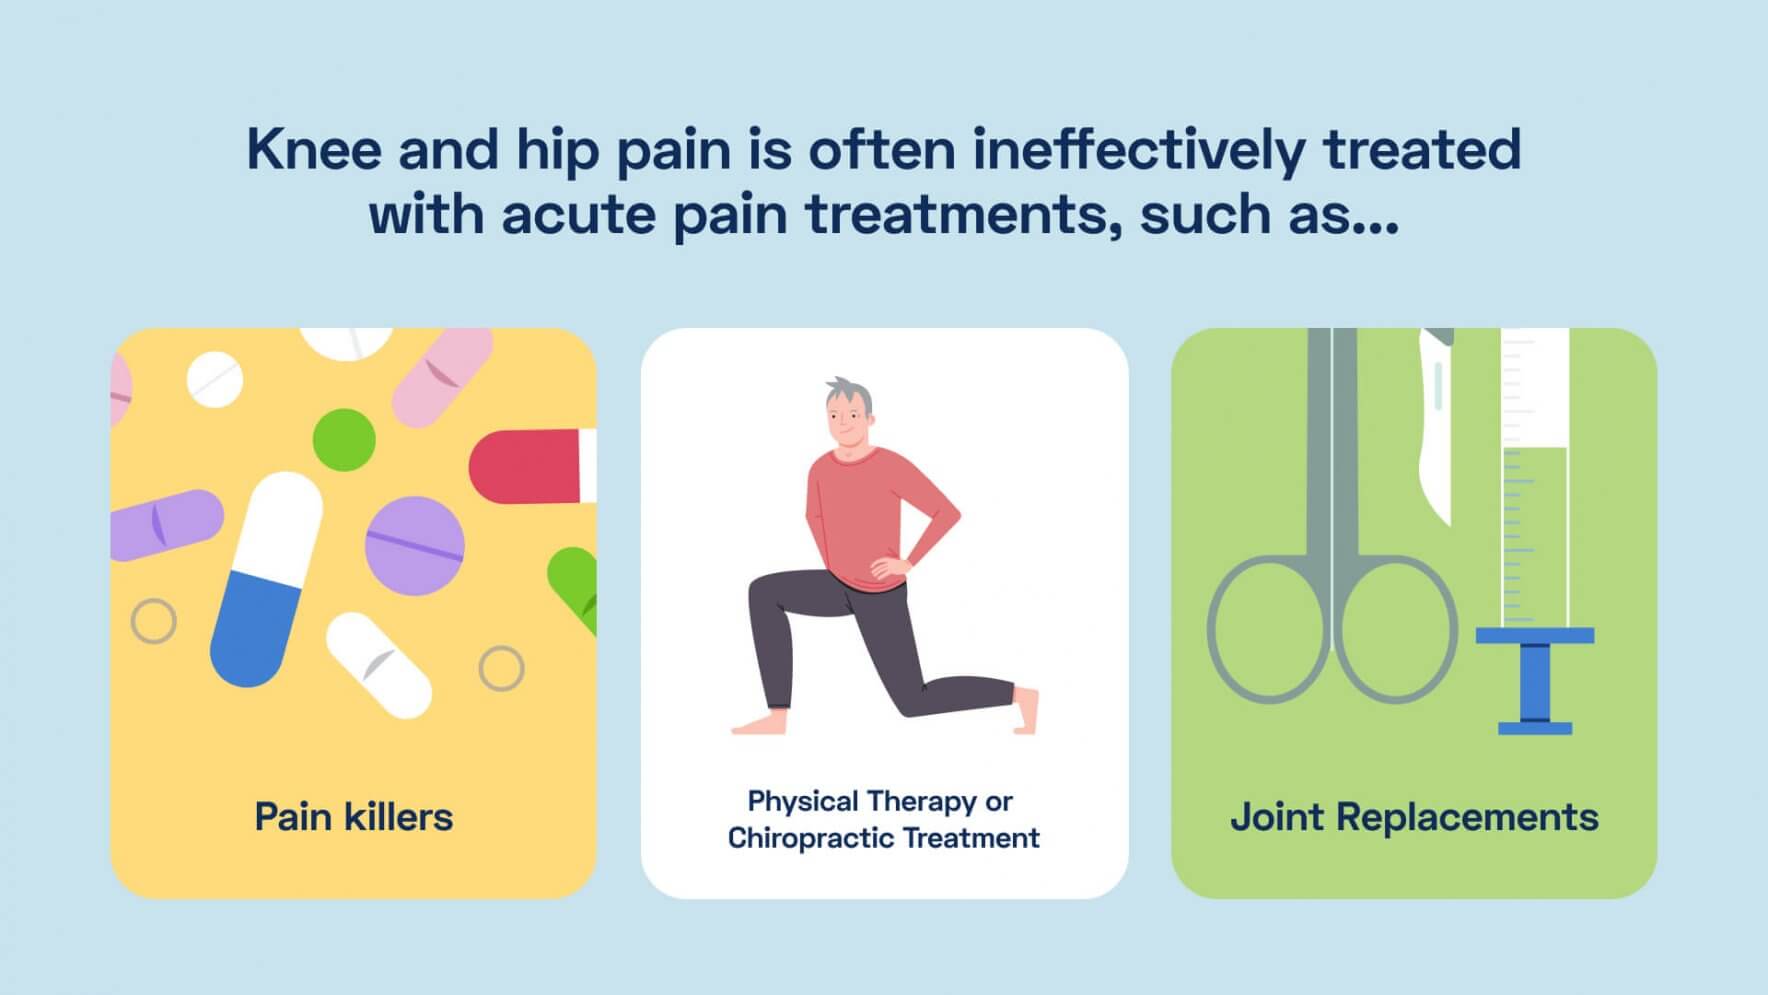 Medicine, physical therapy, and joint replacement ineffectively treat hip and knee pain.